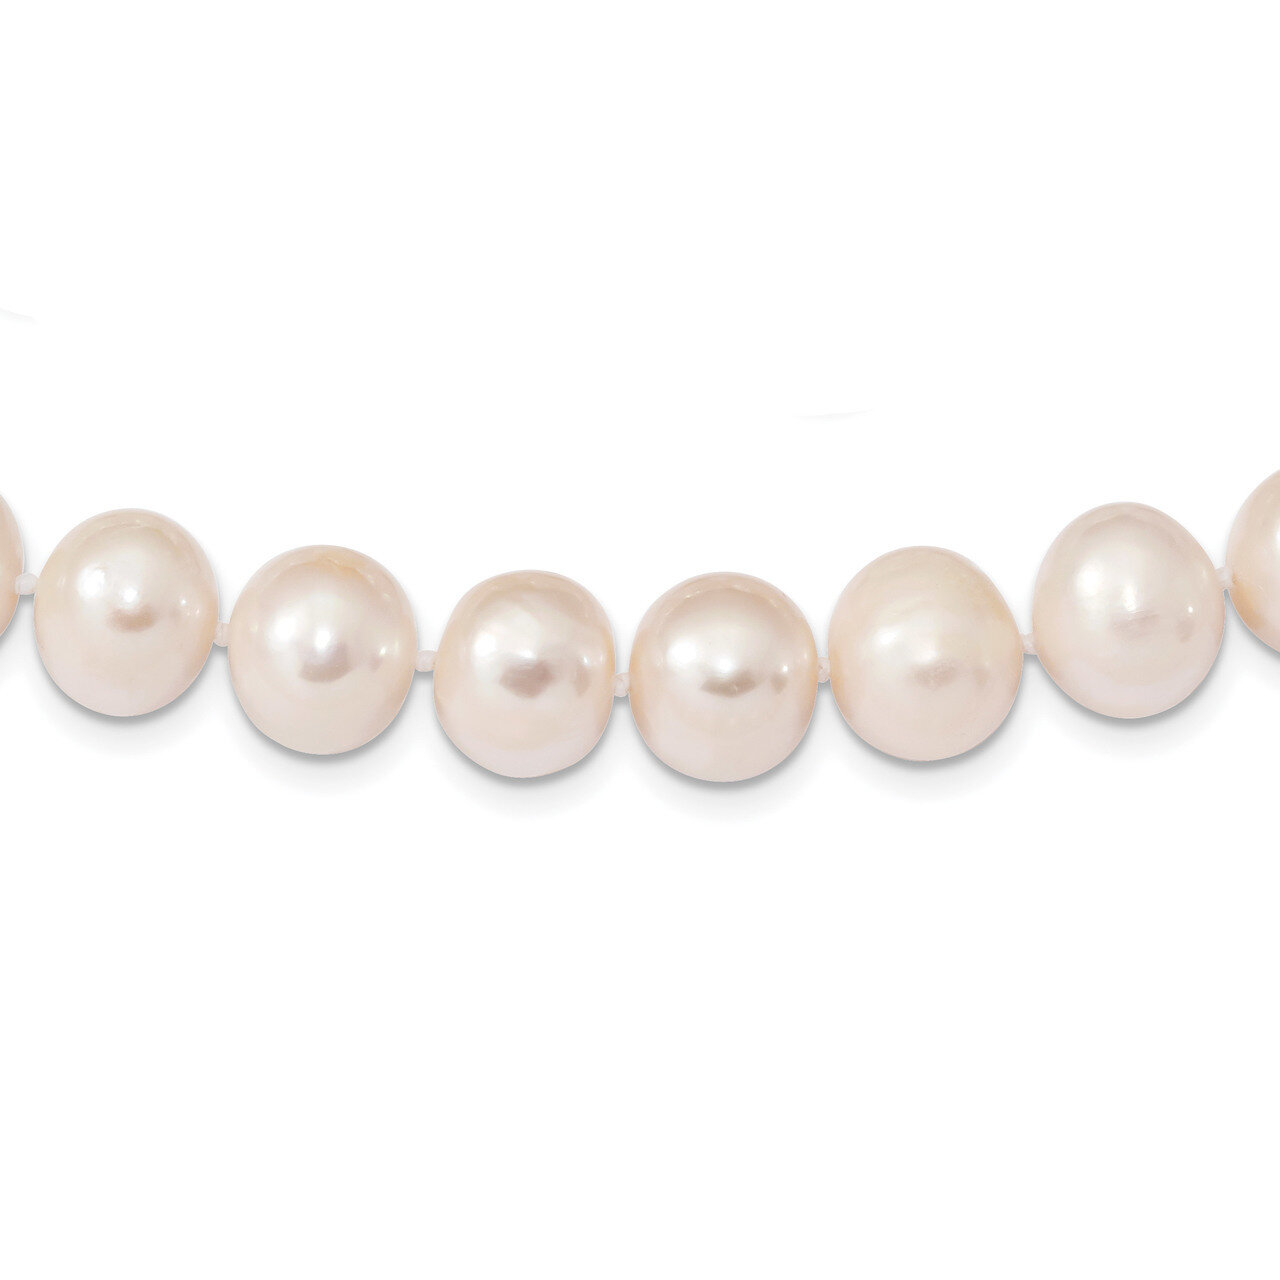 11-12mm White Freshwater Cultured Pearl Necklace 24 Inch Sterling Silver Rhodium QH5151-24